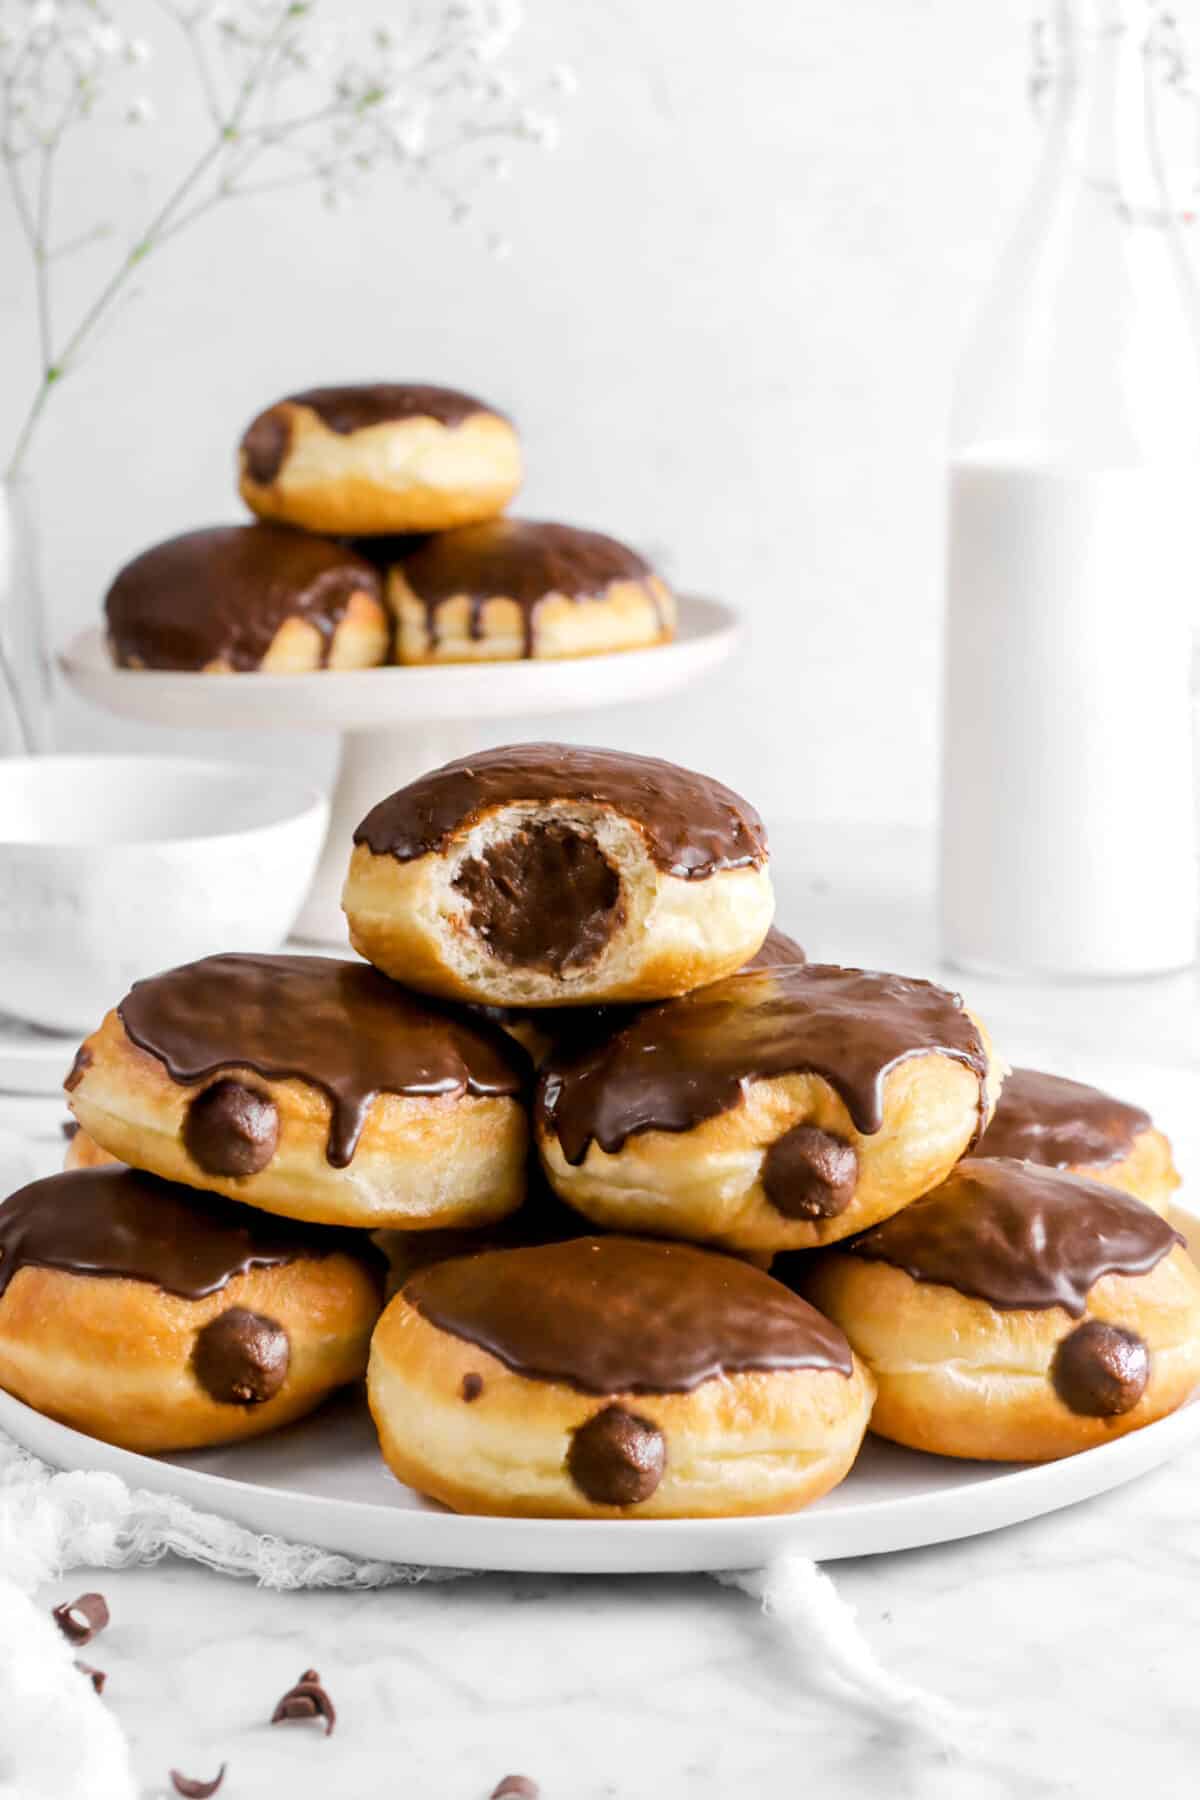 seven doughnuts on a white plate with chocolate glaze and a bite taken out of one with a bottle of milk and three doughnuts behind